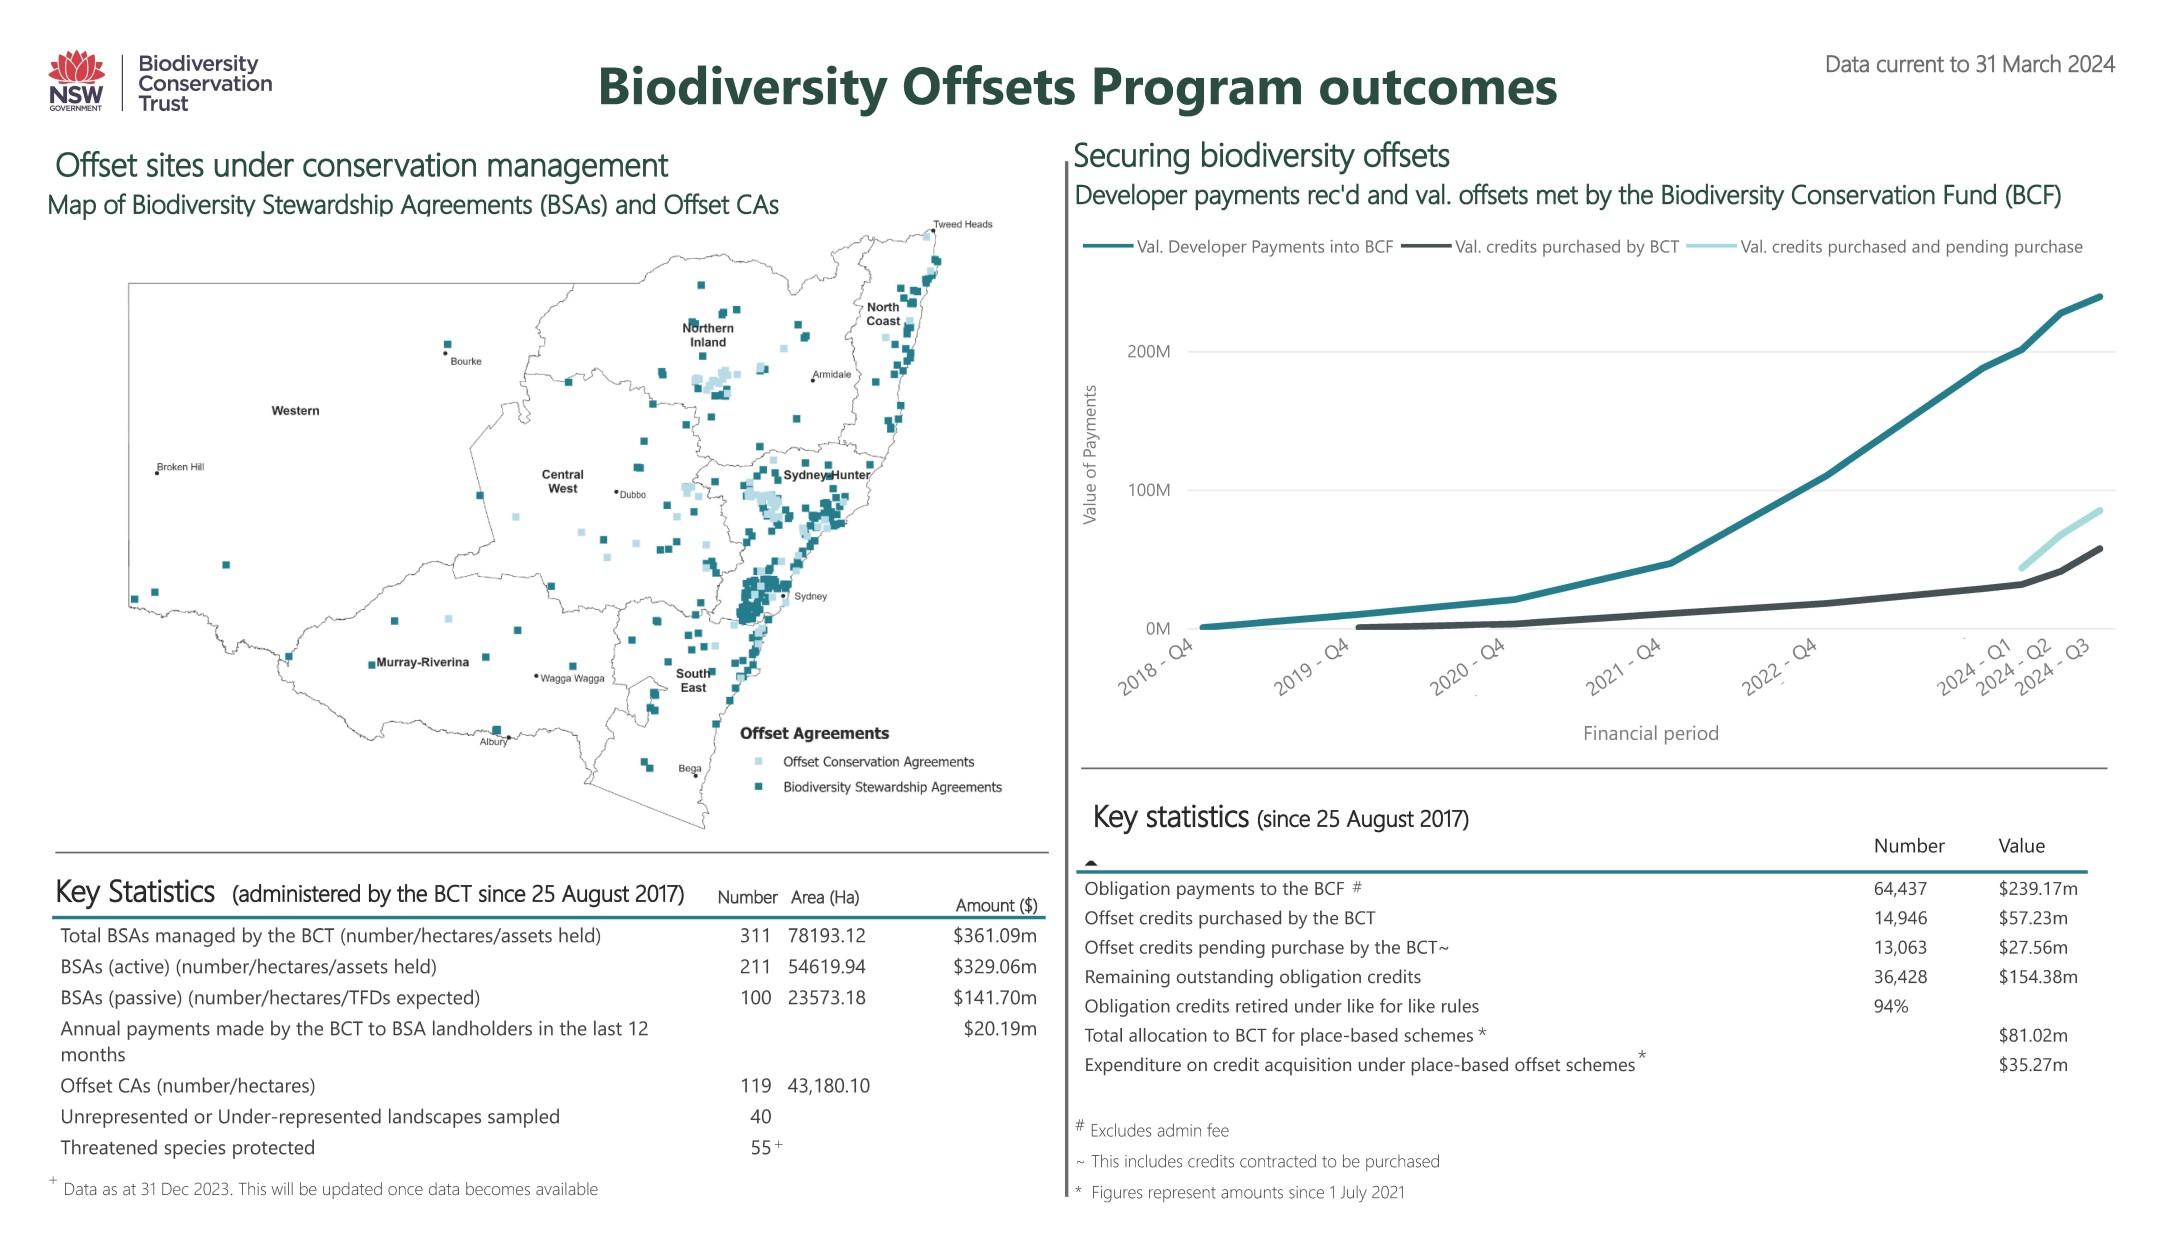 Biodiversity Offsets Program dashboard data as at 31 March 2024